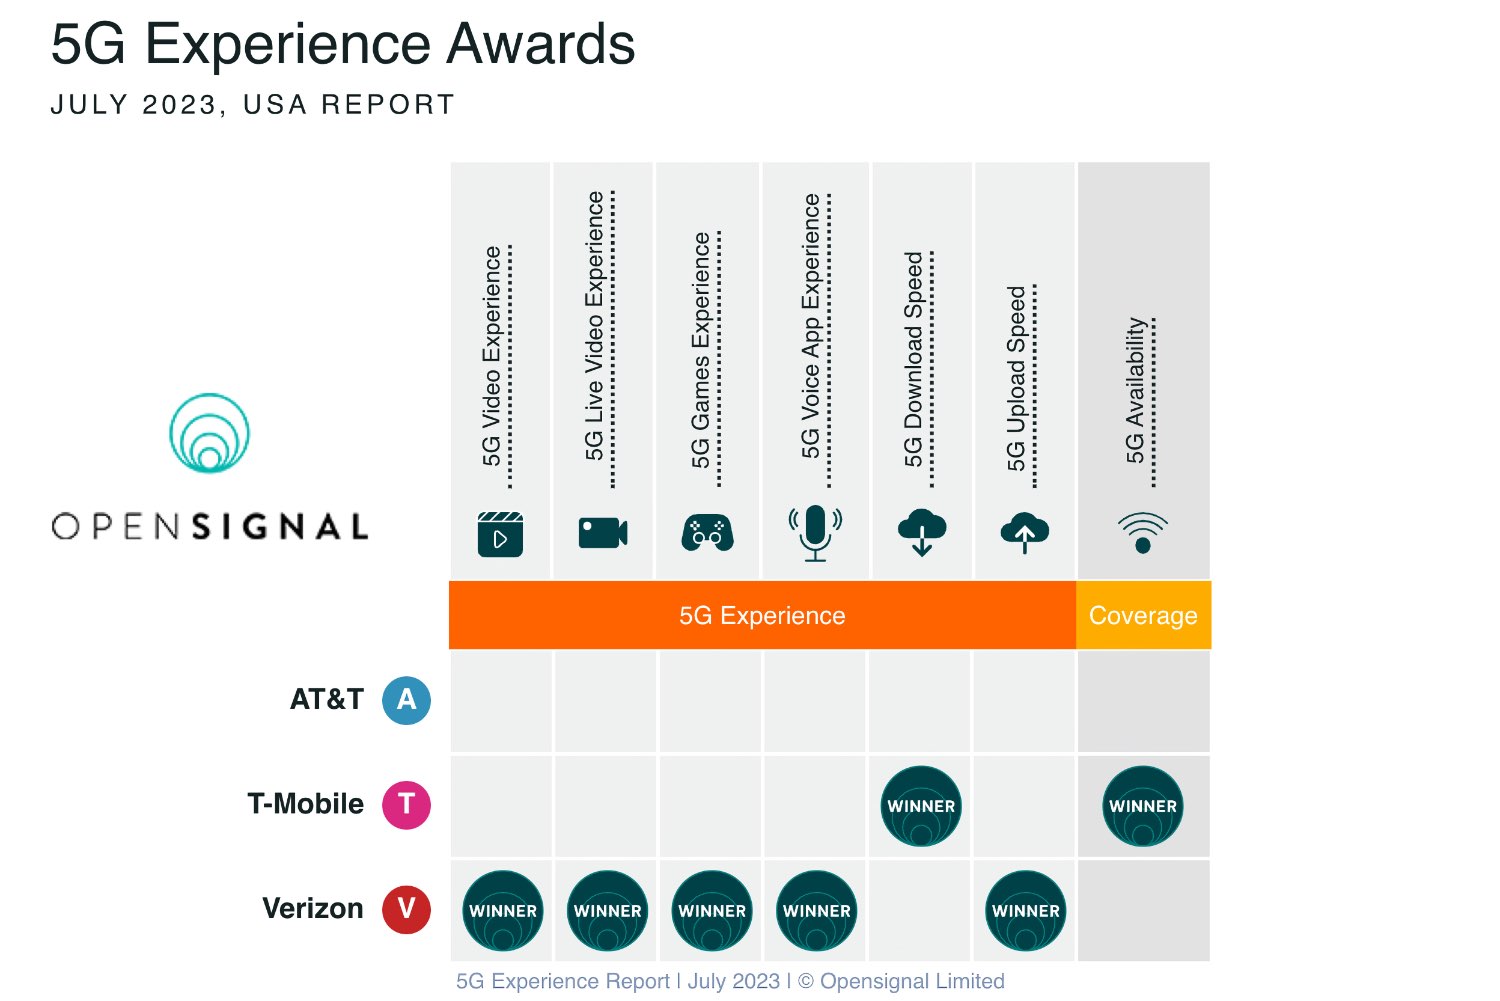 Opensignal 5G Experience Awards for July 2023.